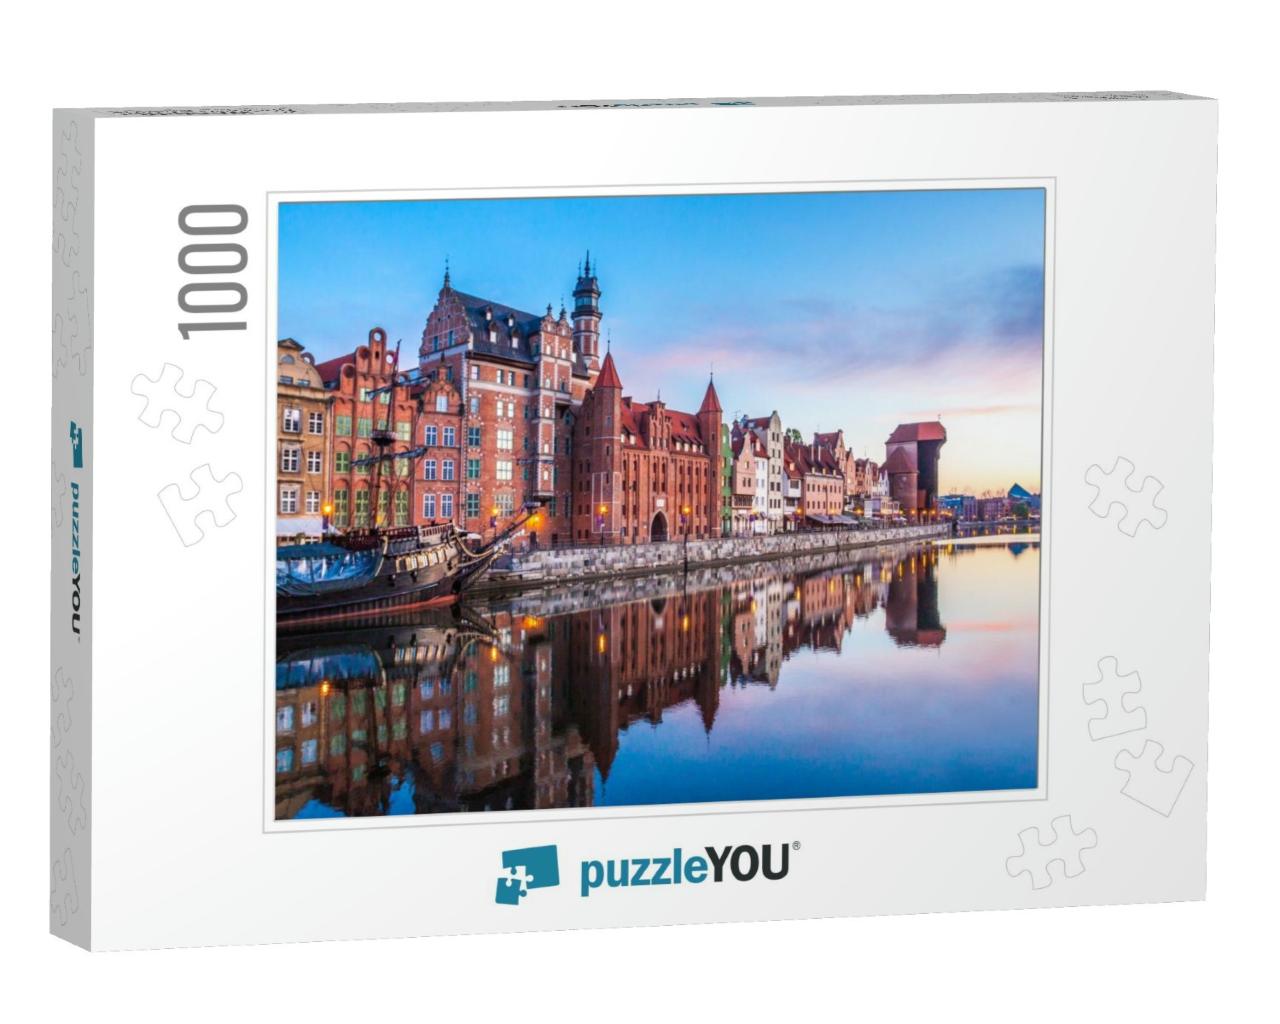 Gdansk Old Town & Famous Crane At Amazing Sunrise. Gdansk... Jigsaw Puzzle with 1000 pieces